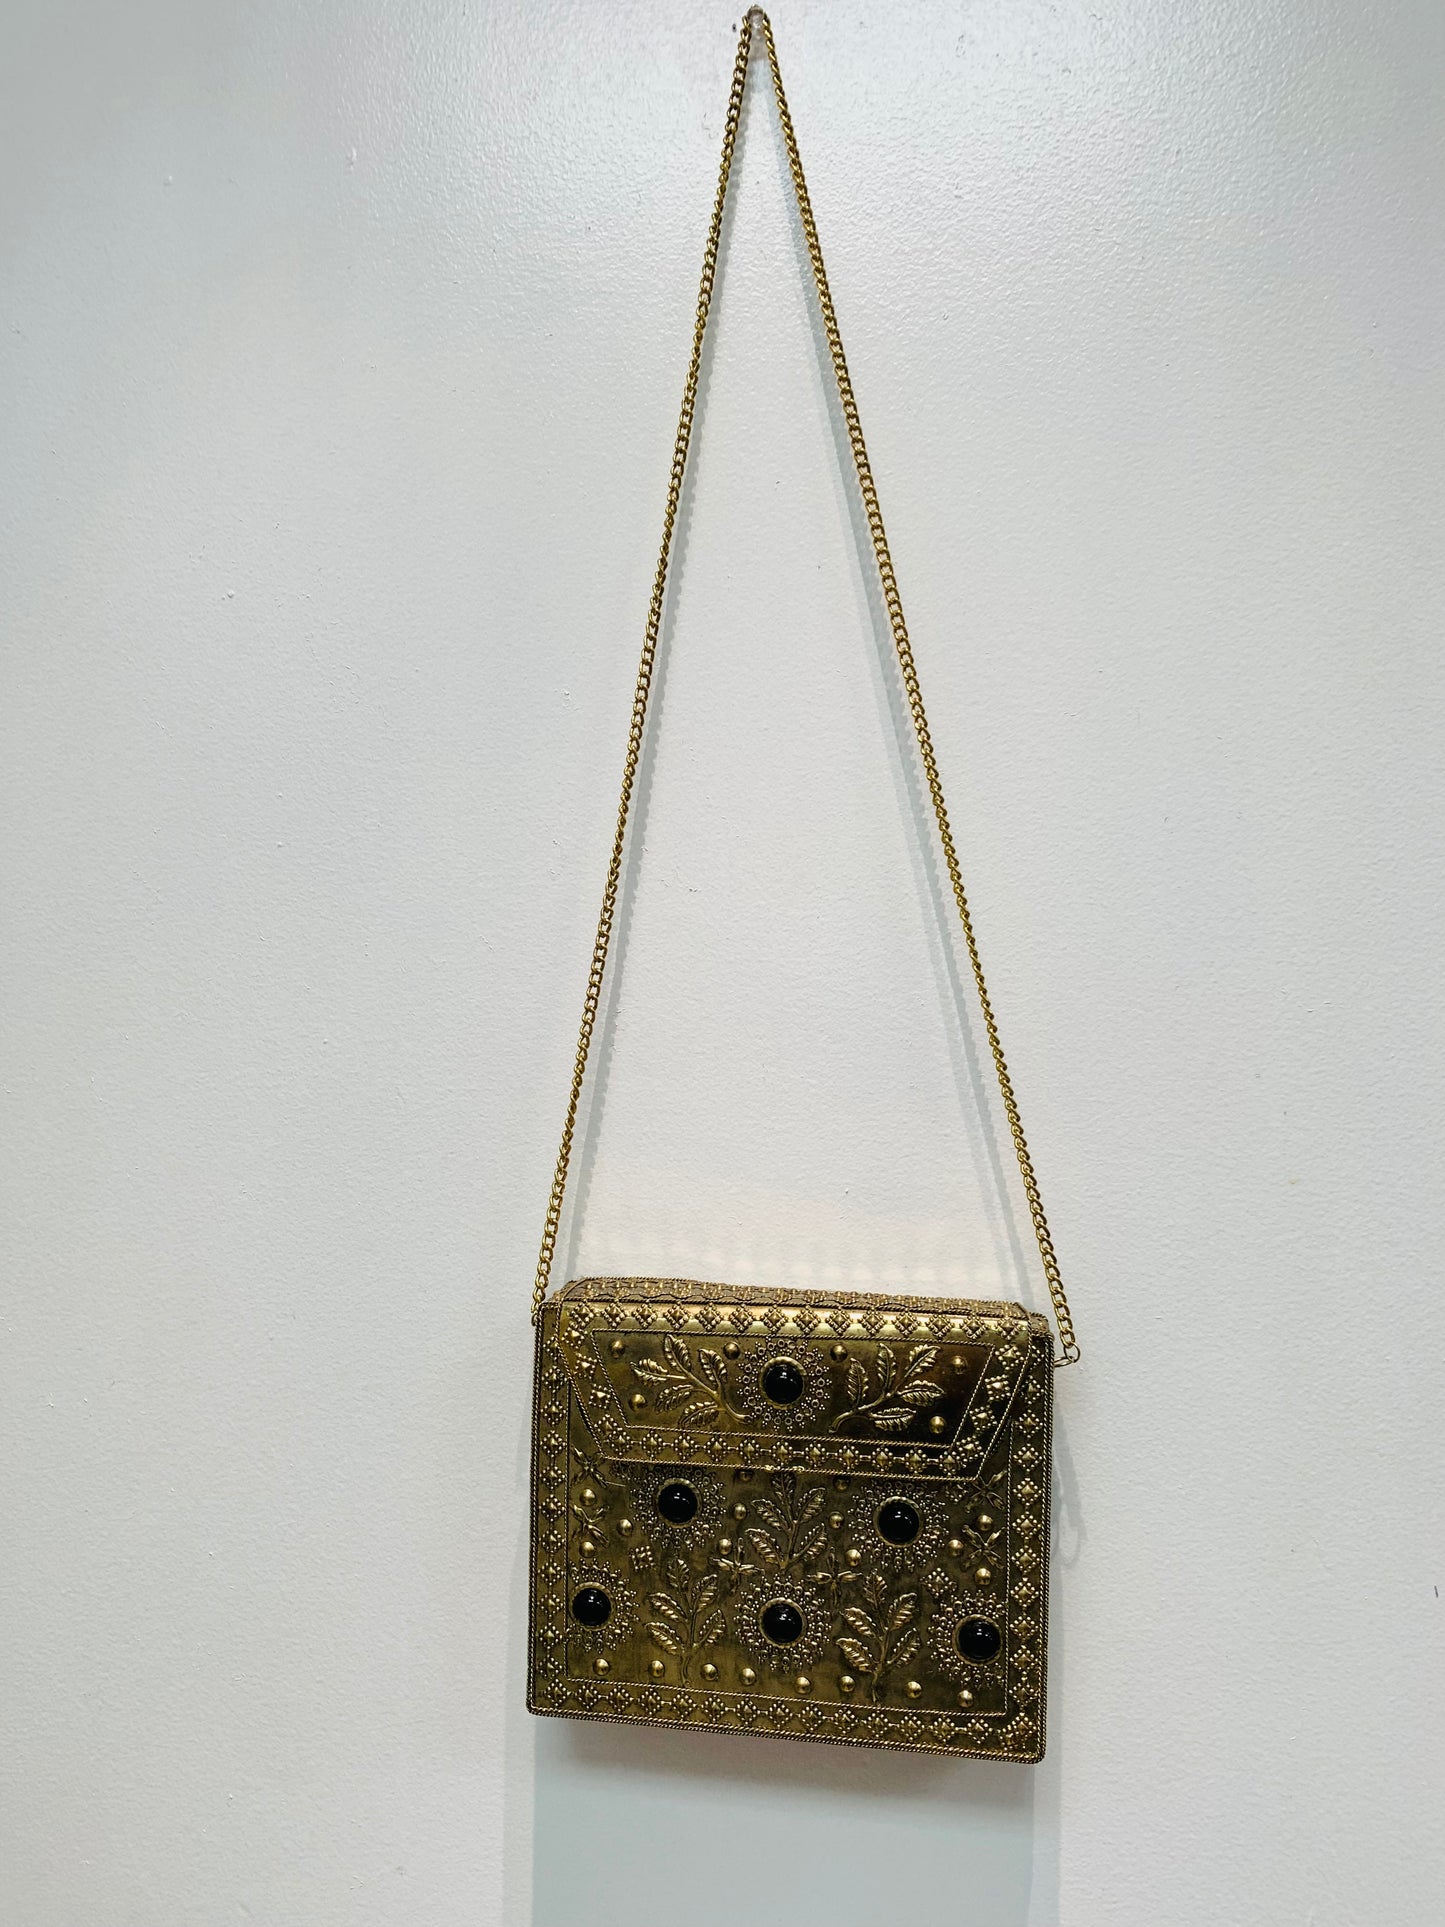 Bohemian style handcrafted metal / Brass Clutch #90727